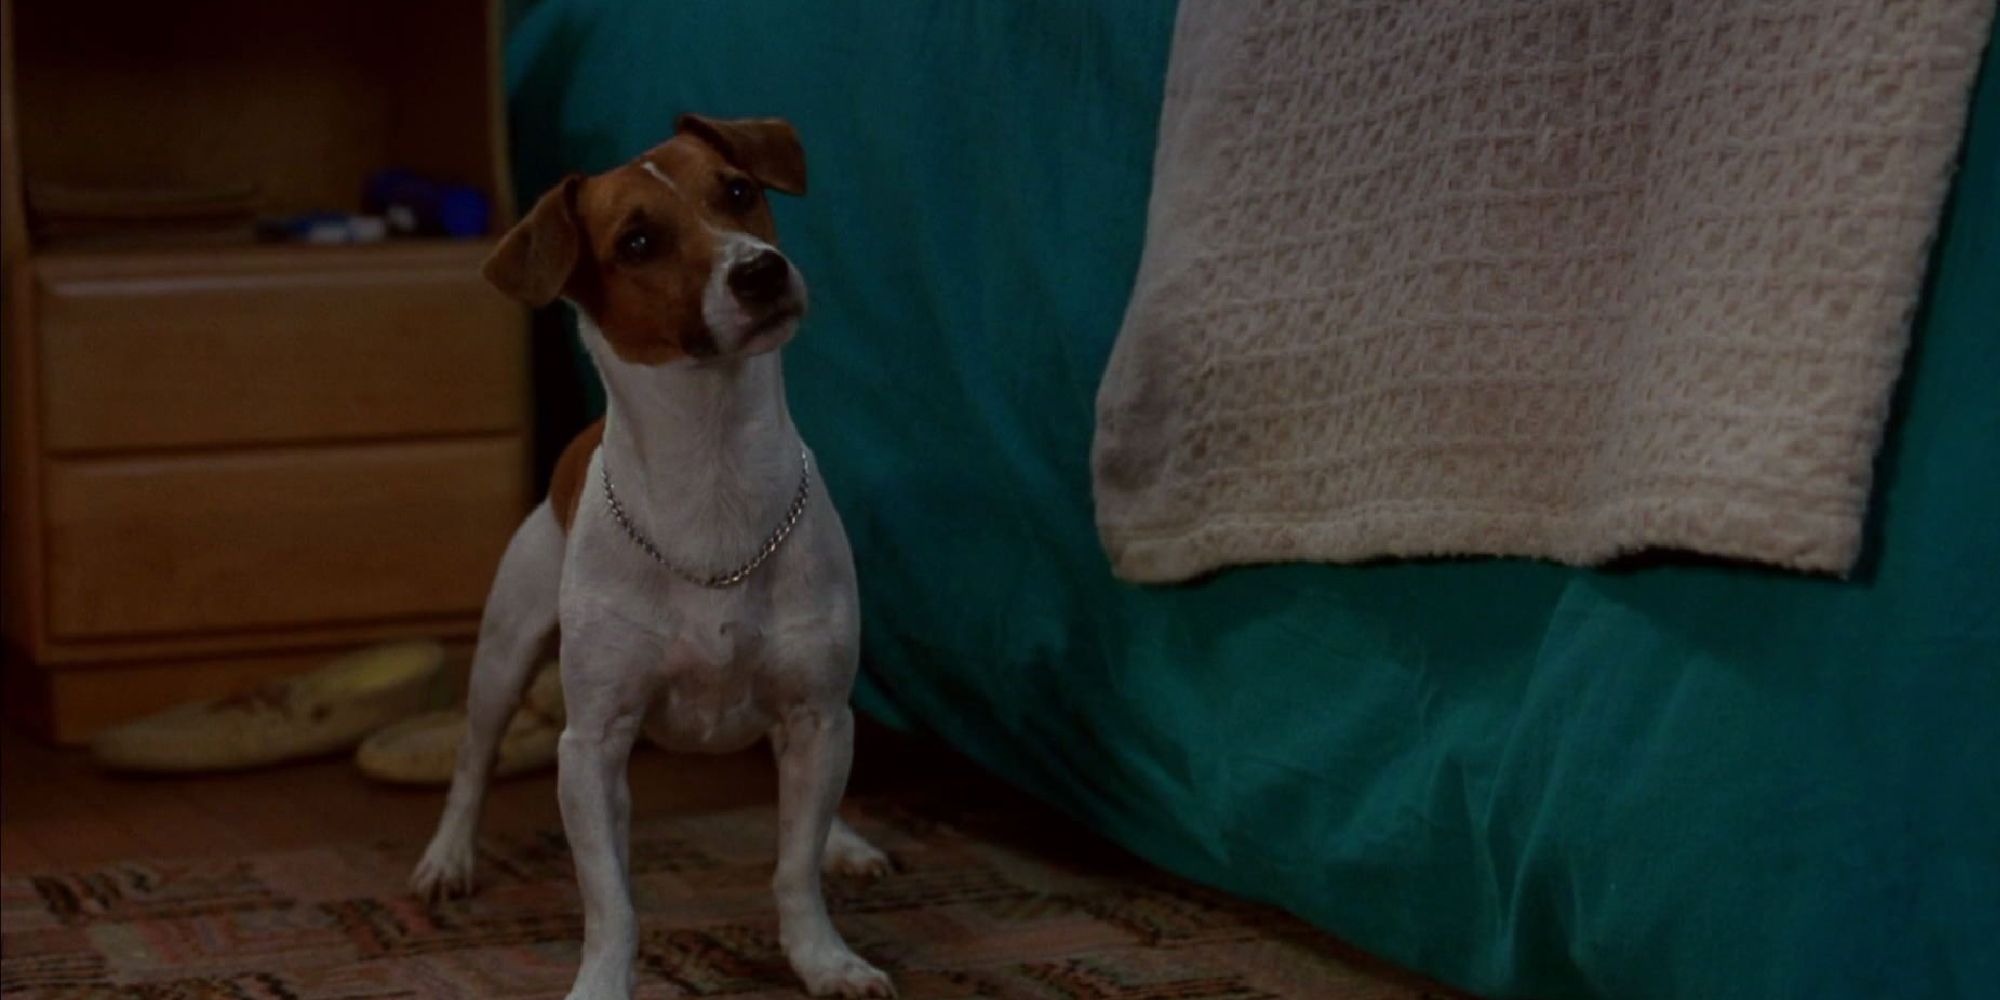 Milo the Dog in 'The Mask'